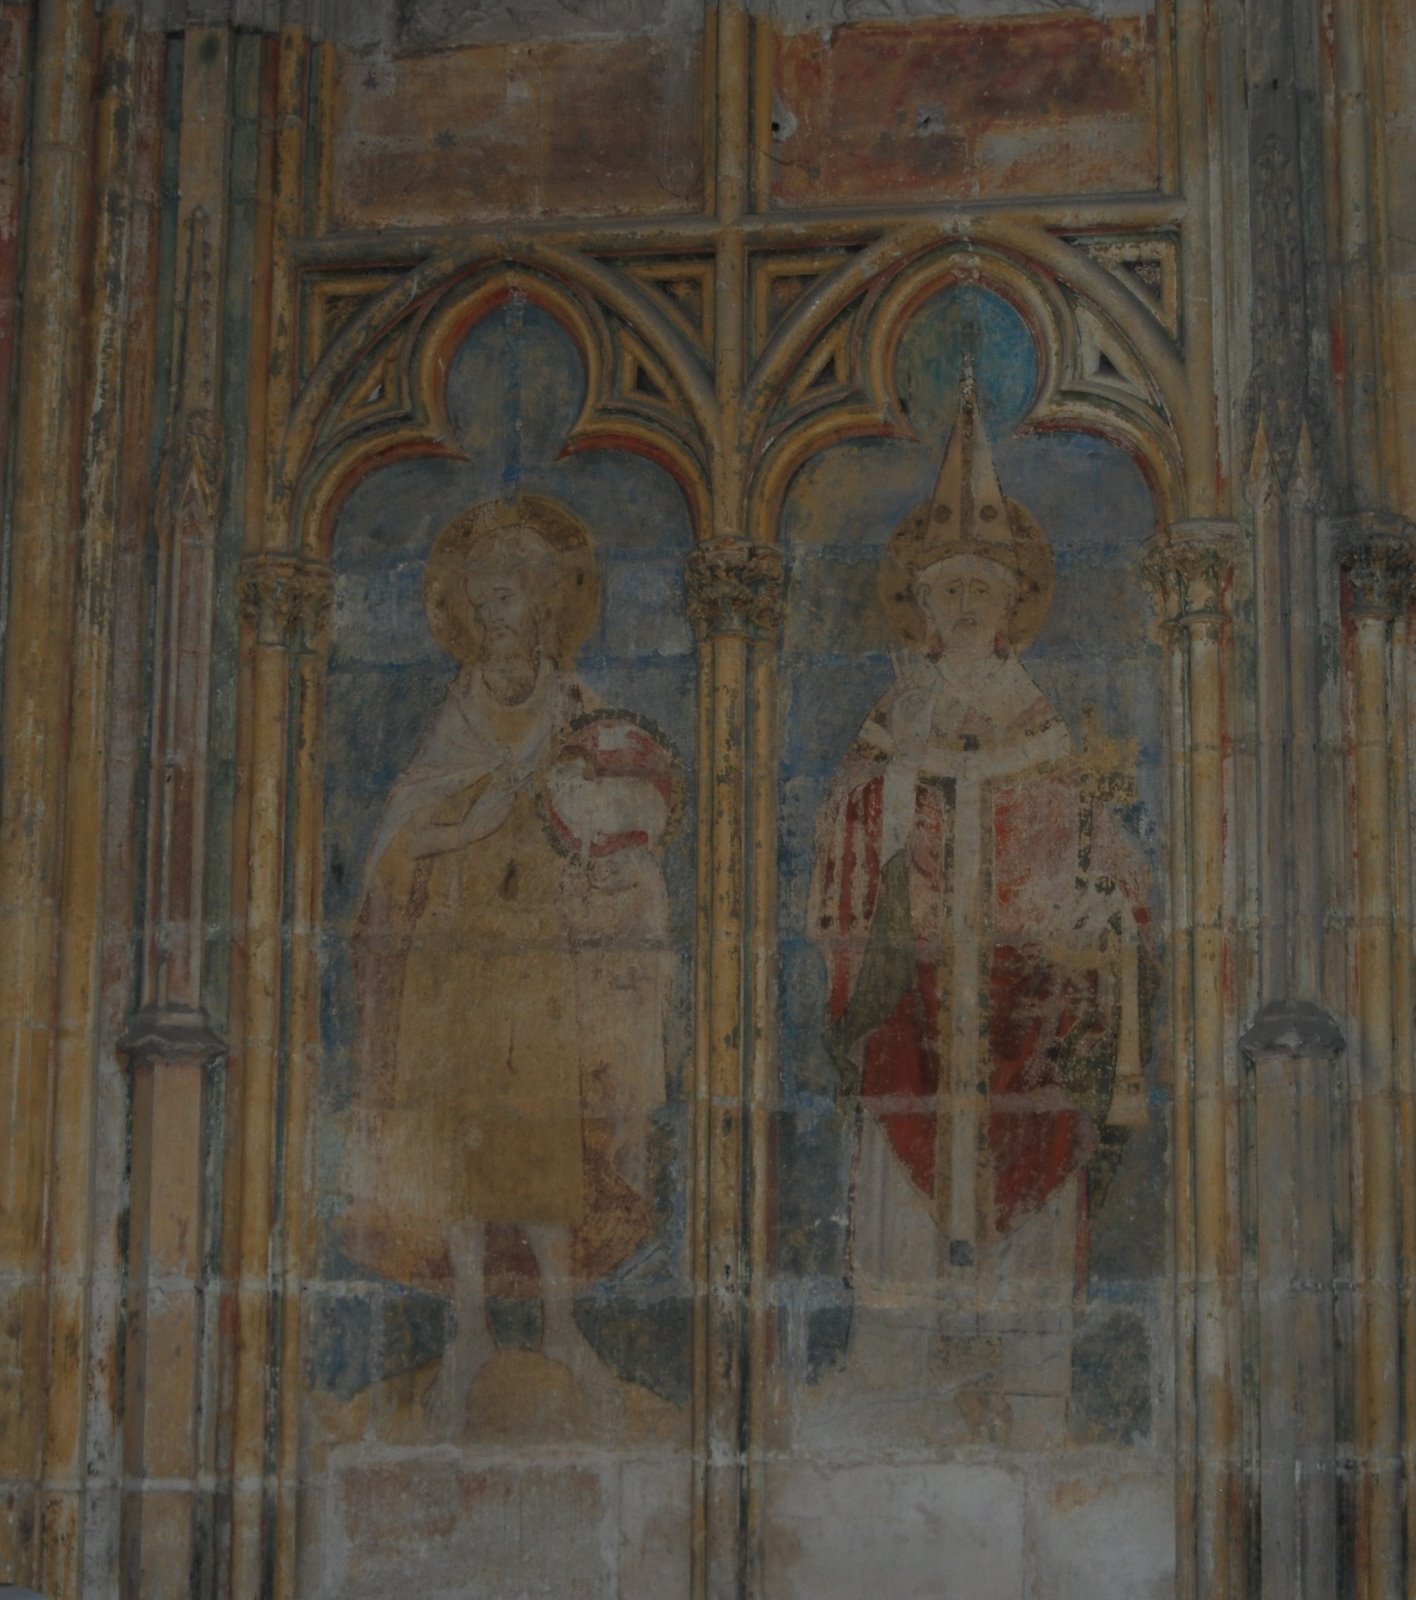 [Auxerre+wall+painting.jpg]